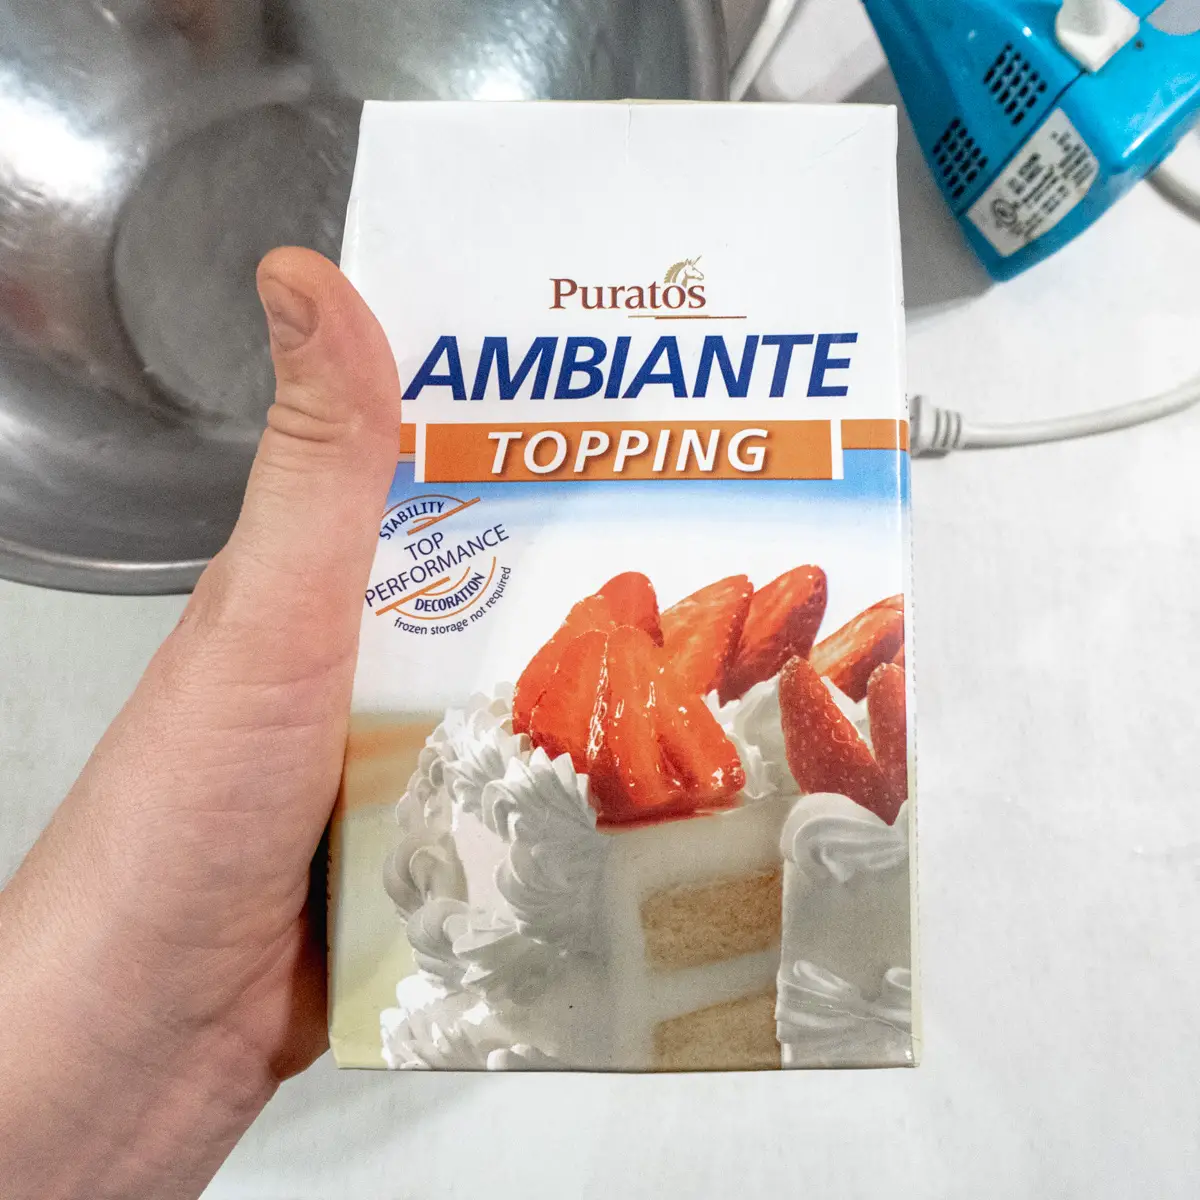 Ambiante vegan whipped cream by the brand Puratos being held up in front of a bowl.